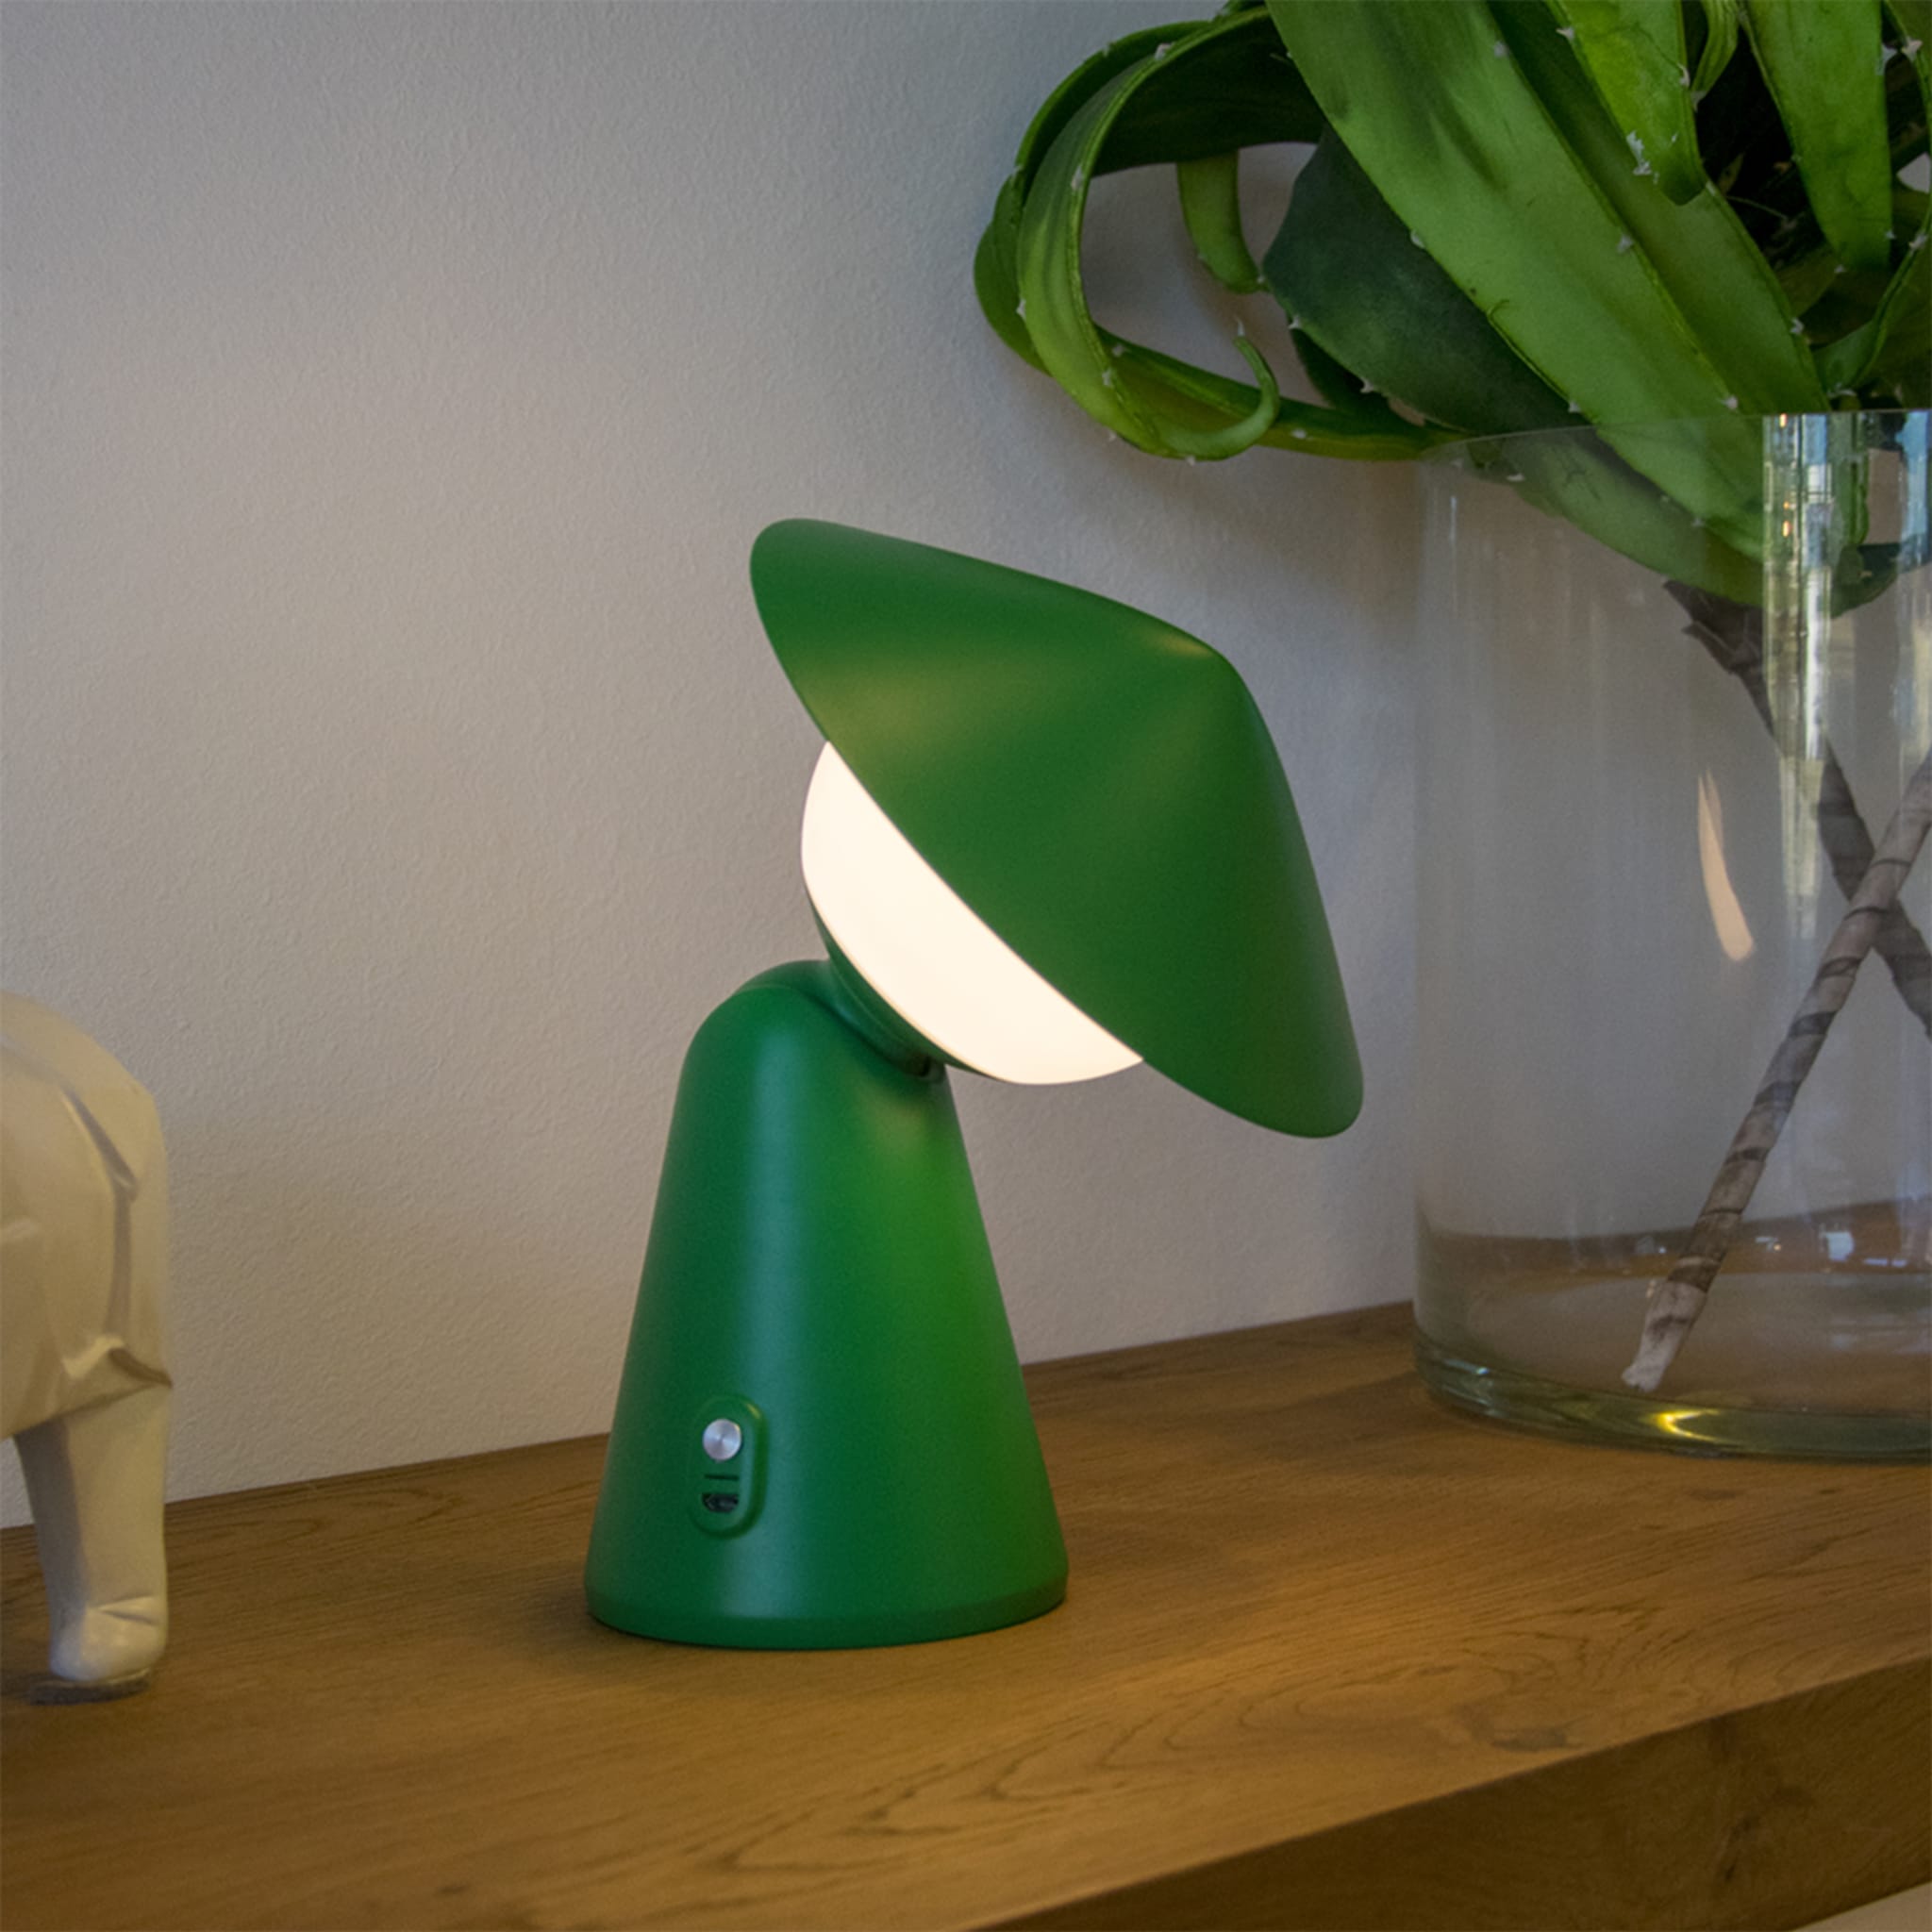 Puddy Green Rechargeable Table Lamp by Albore Design - Alternative view 2